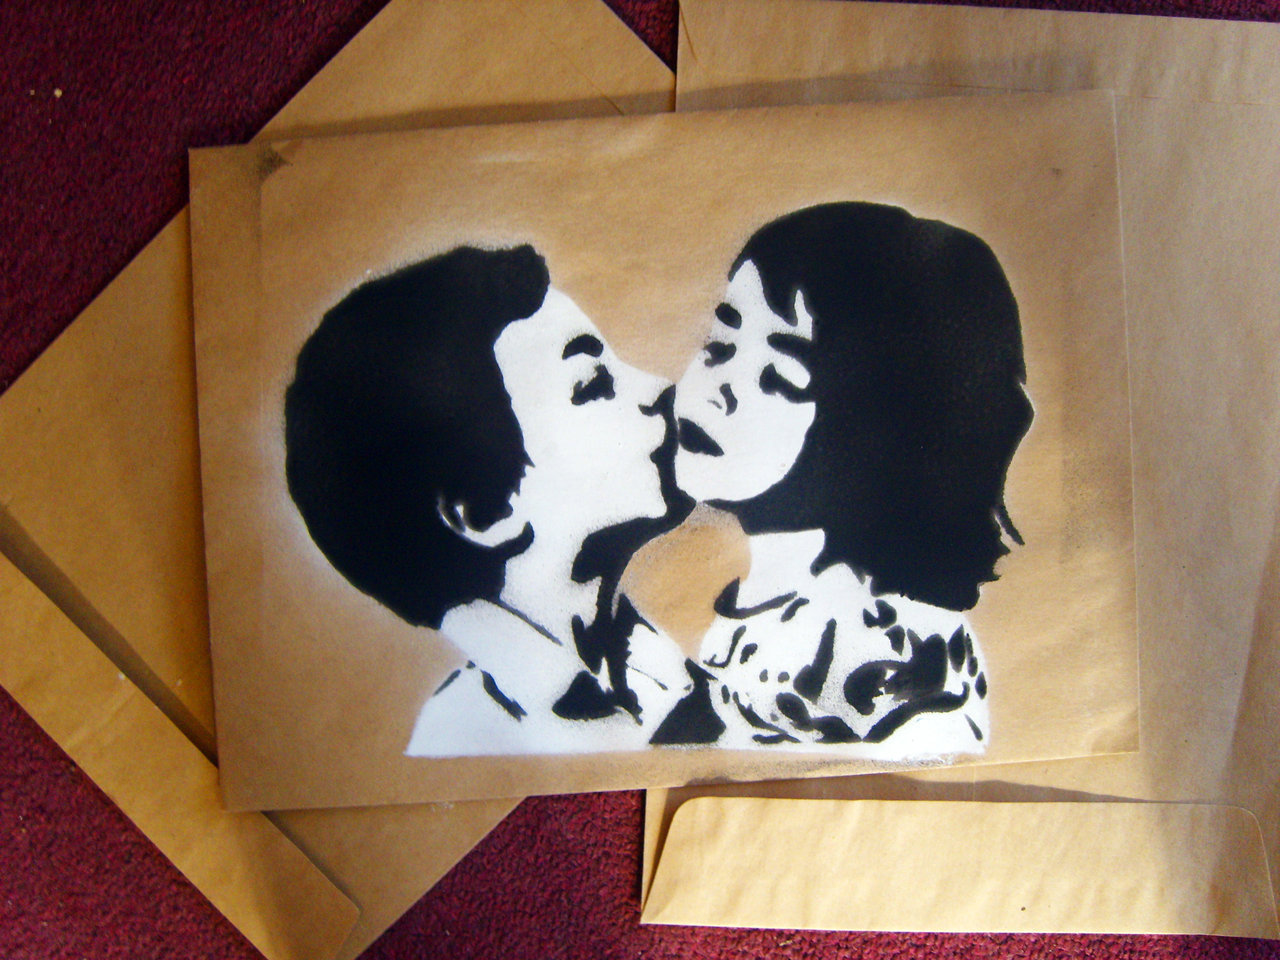 another stencil that I made:  http://mapaz.tumblr.com/